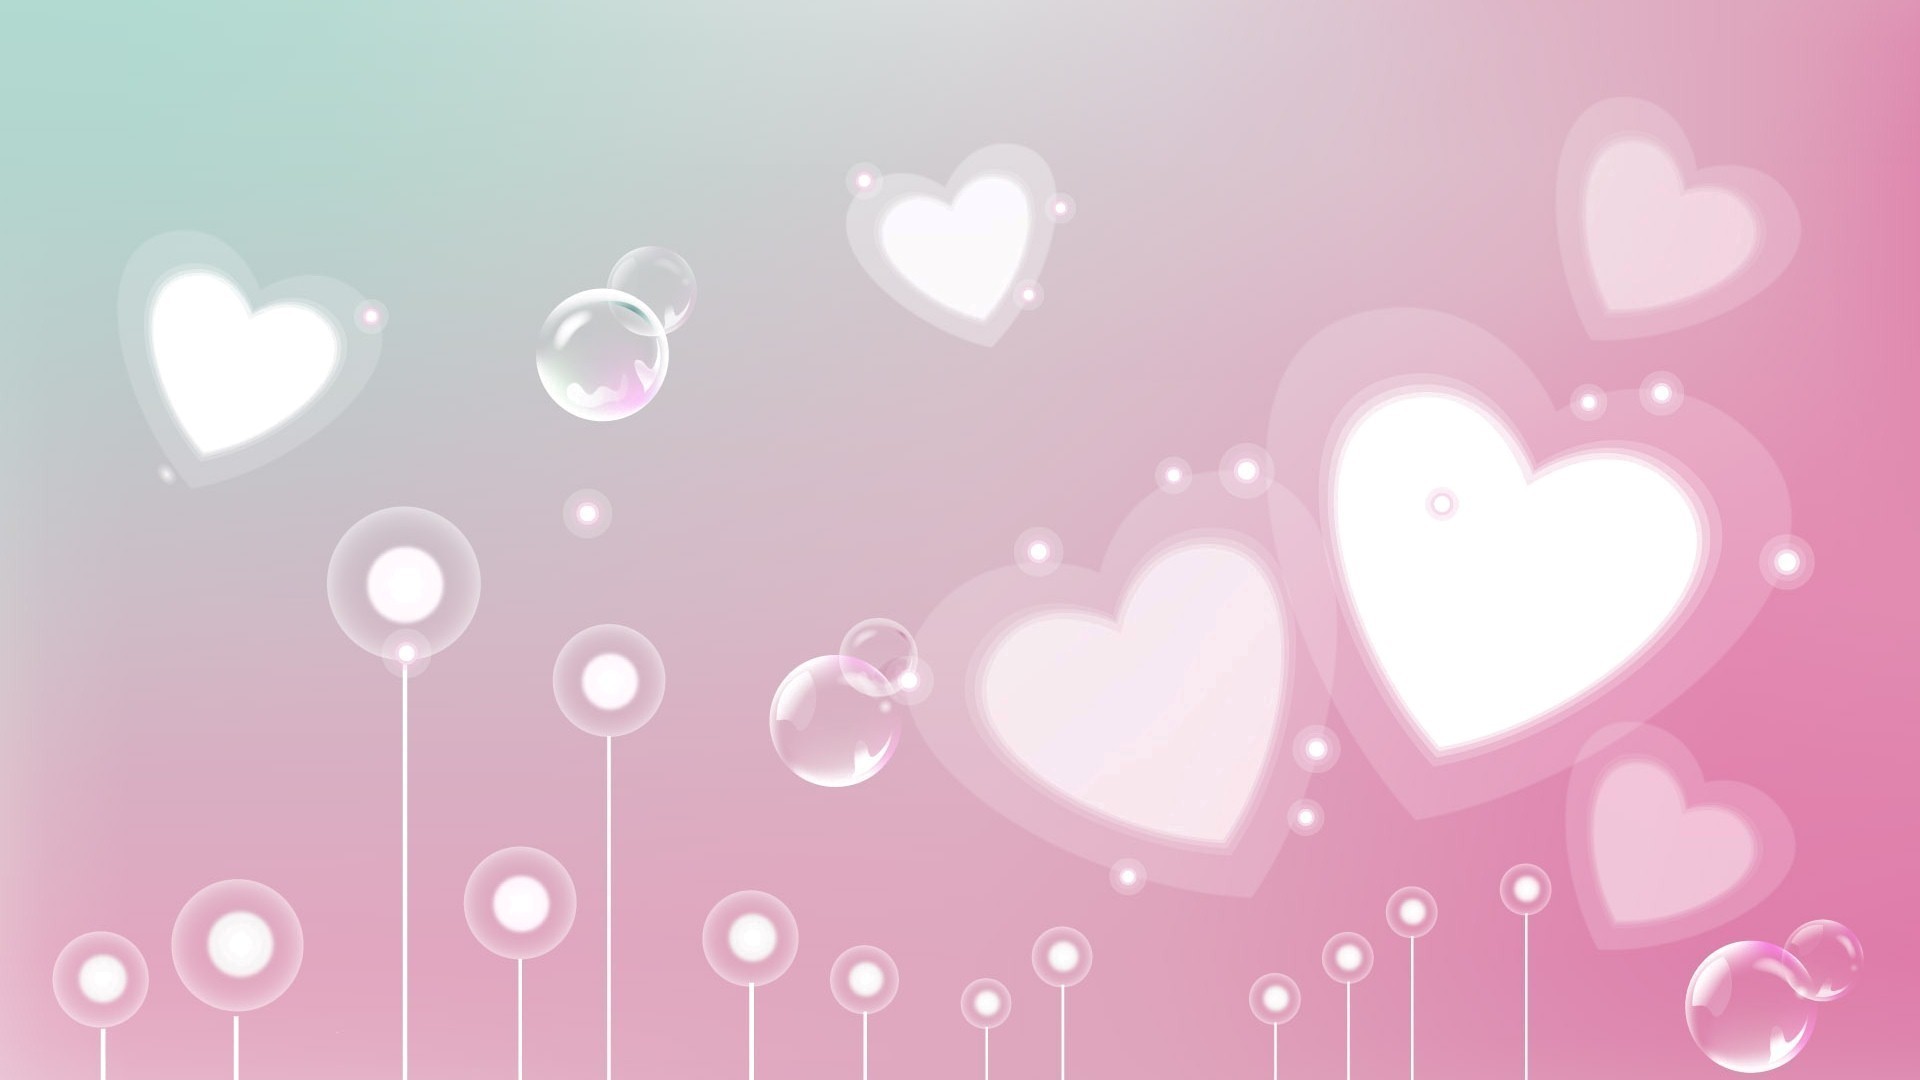 Pretty Heart Wallpapers Pic Wpxh520243 1920x1080